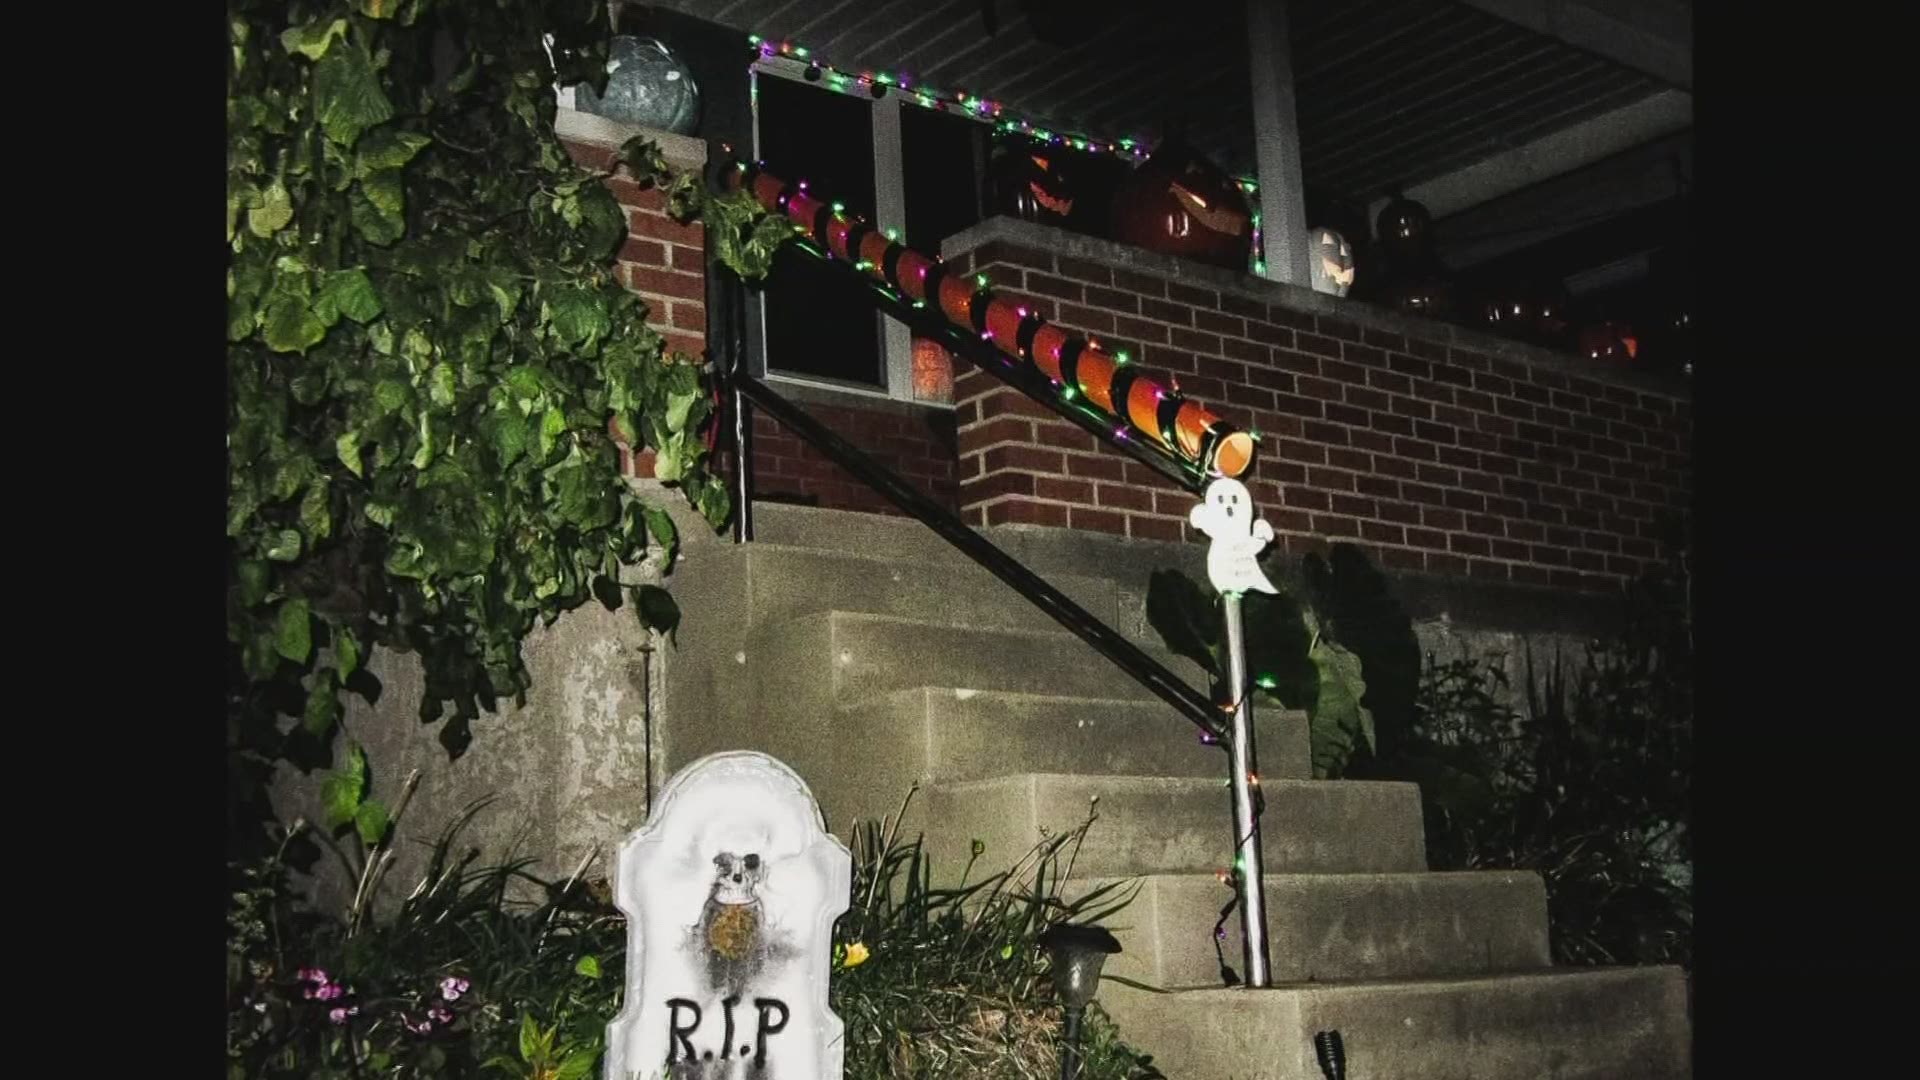 Bryant Somerville talks with a Cincinnati man who has a creative option to keep kids safe this Halloween.